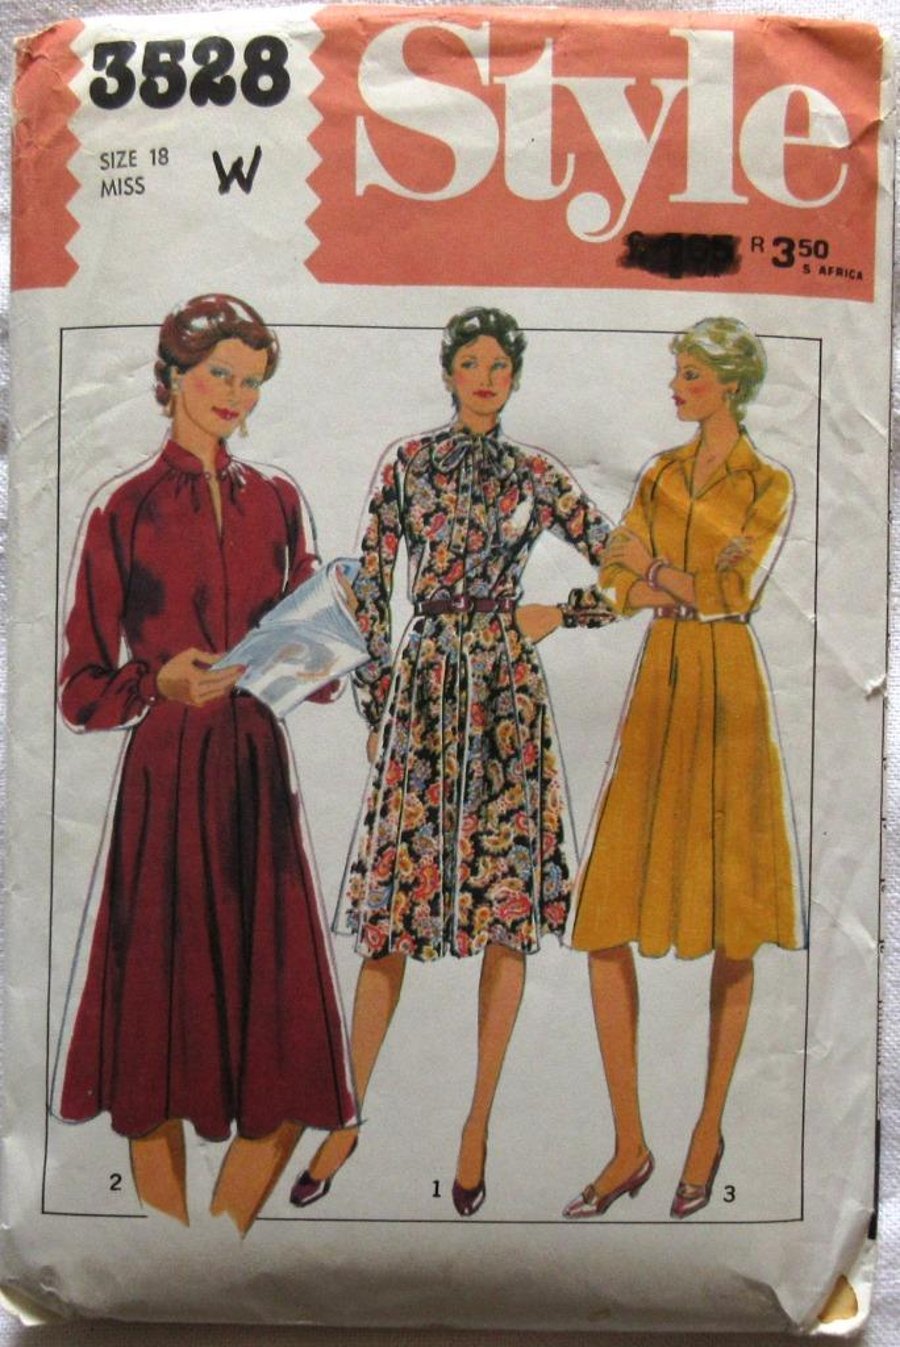 An uncut vintage sewing pattern for a misses' long-sleeved dress in size 18